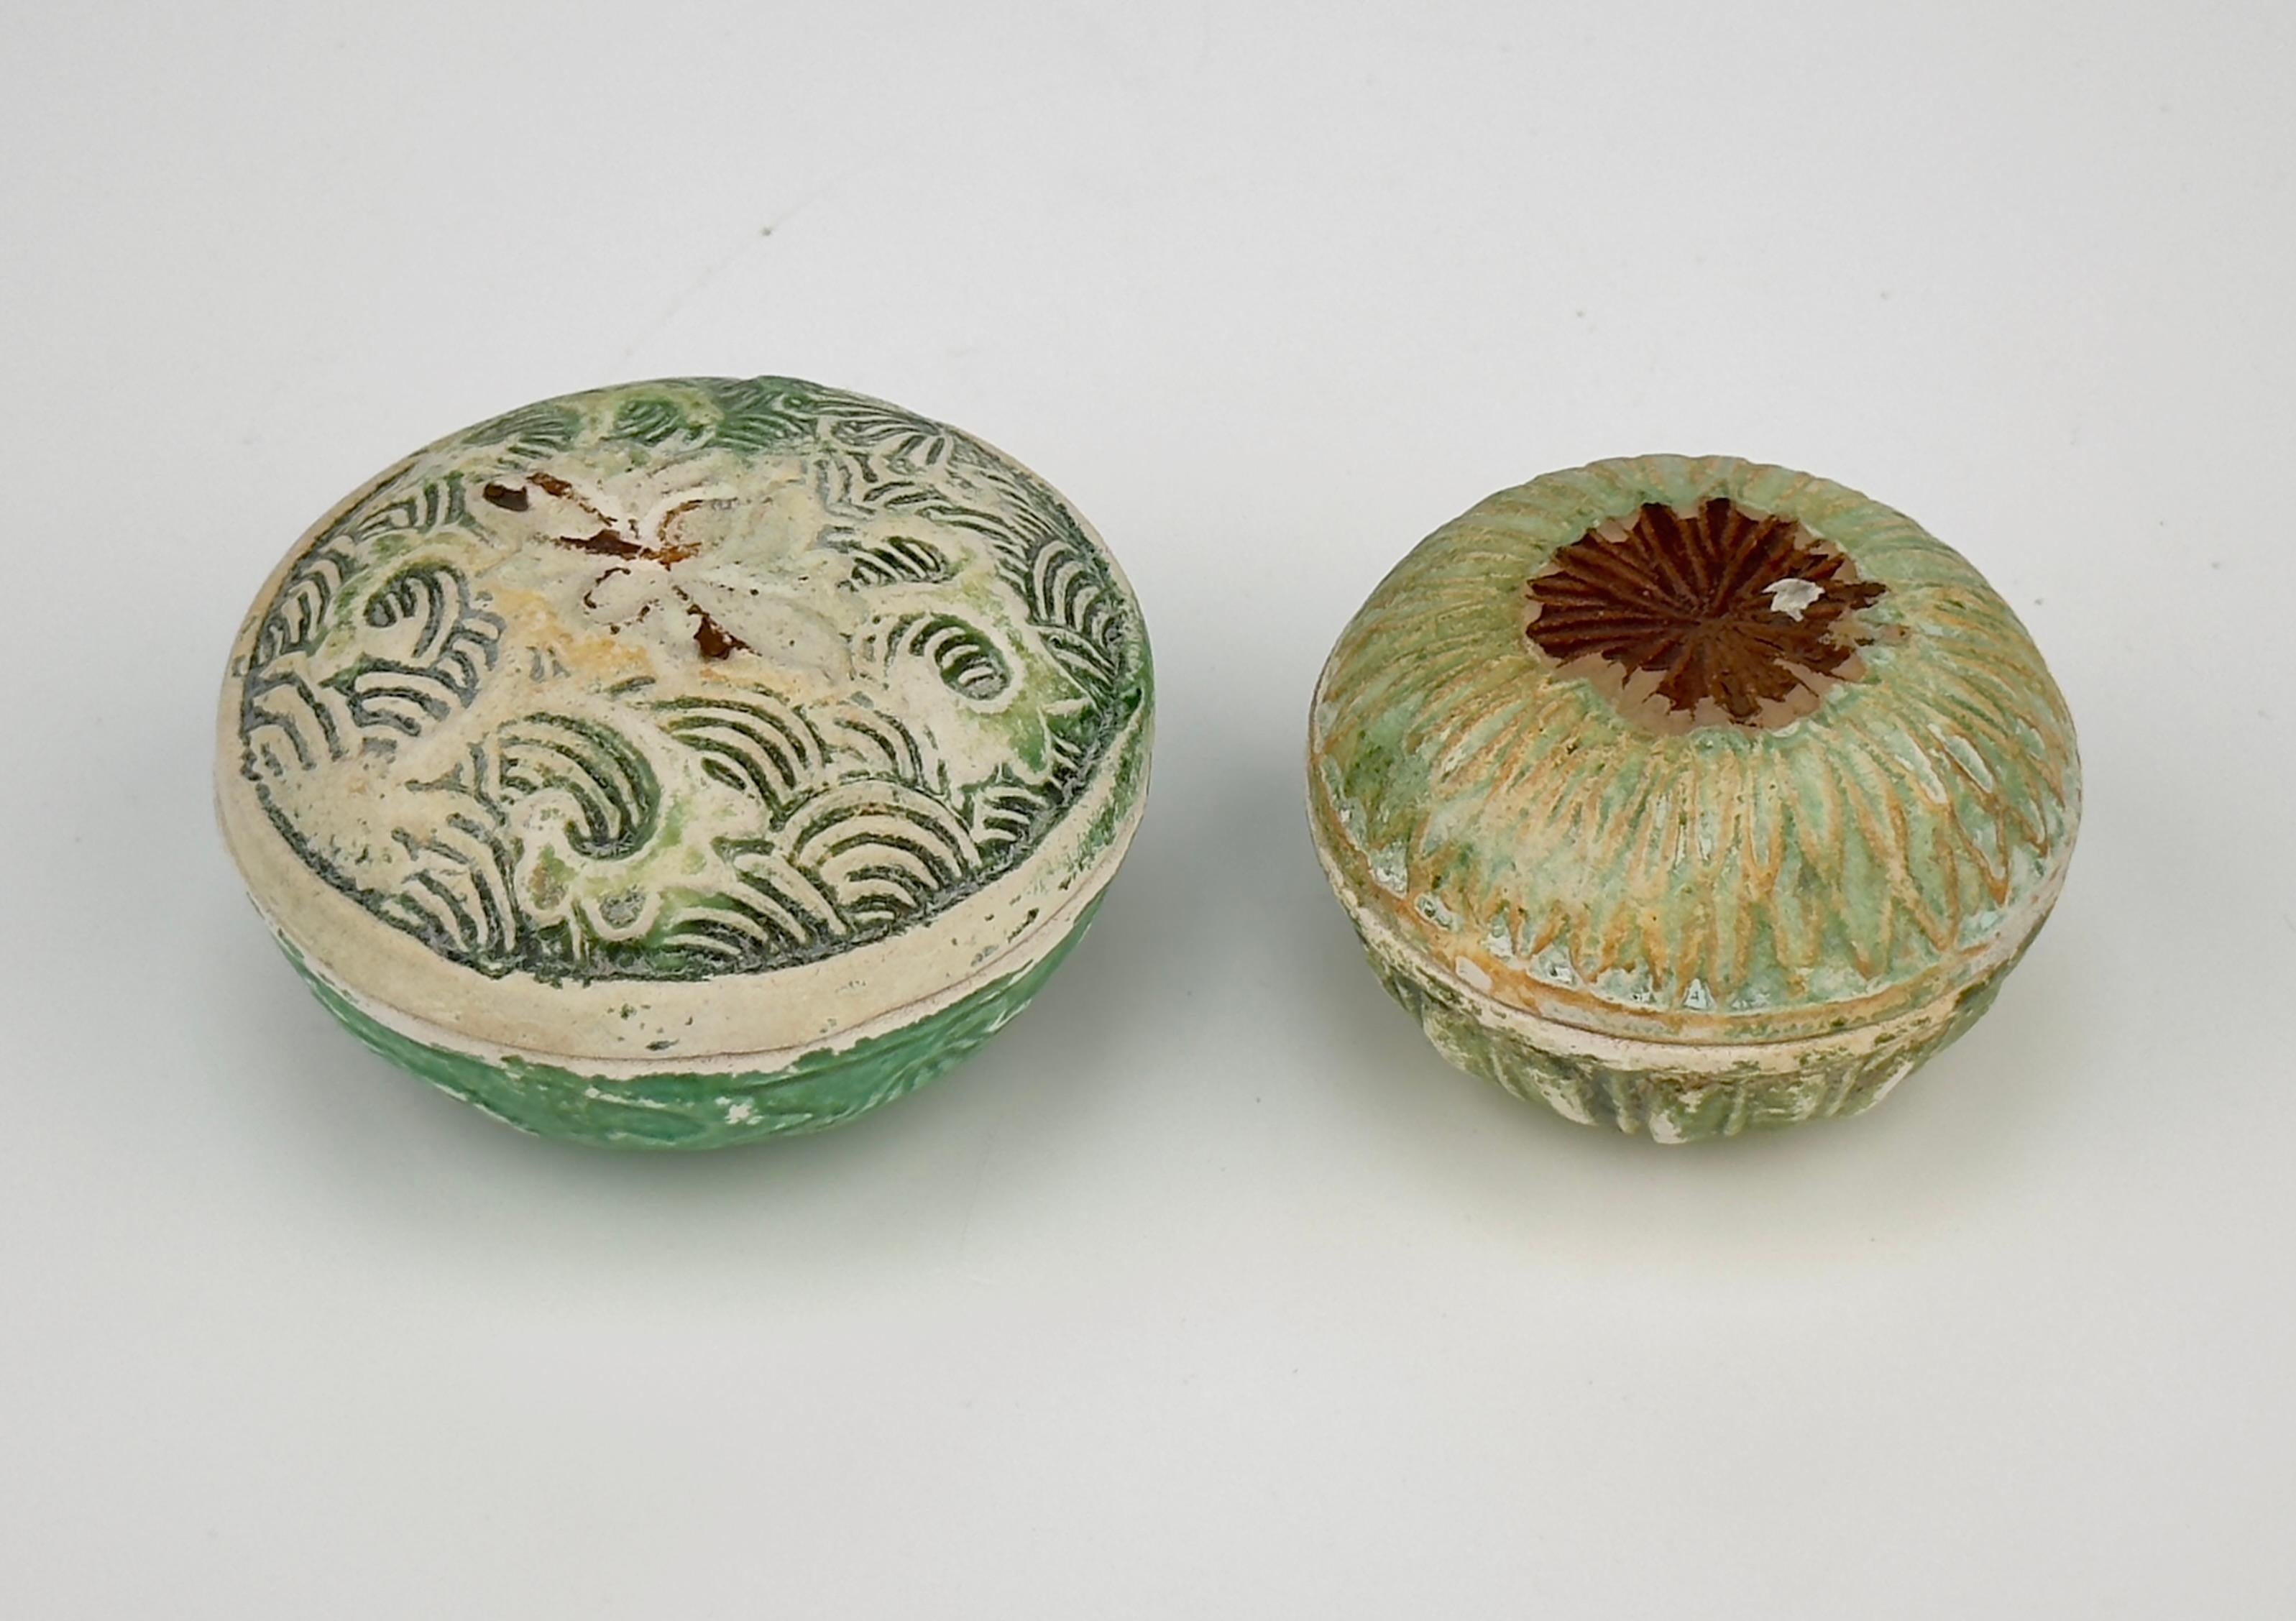 Swatow Lidded Boxes in the shape of Waves and Flowers, Late Ming Era(16-17th c) For Sale 6